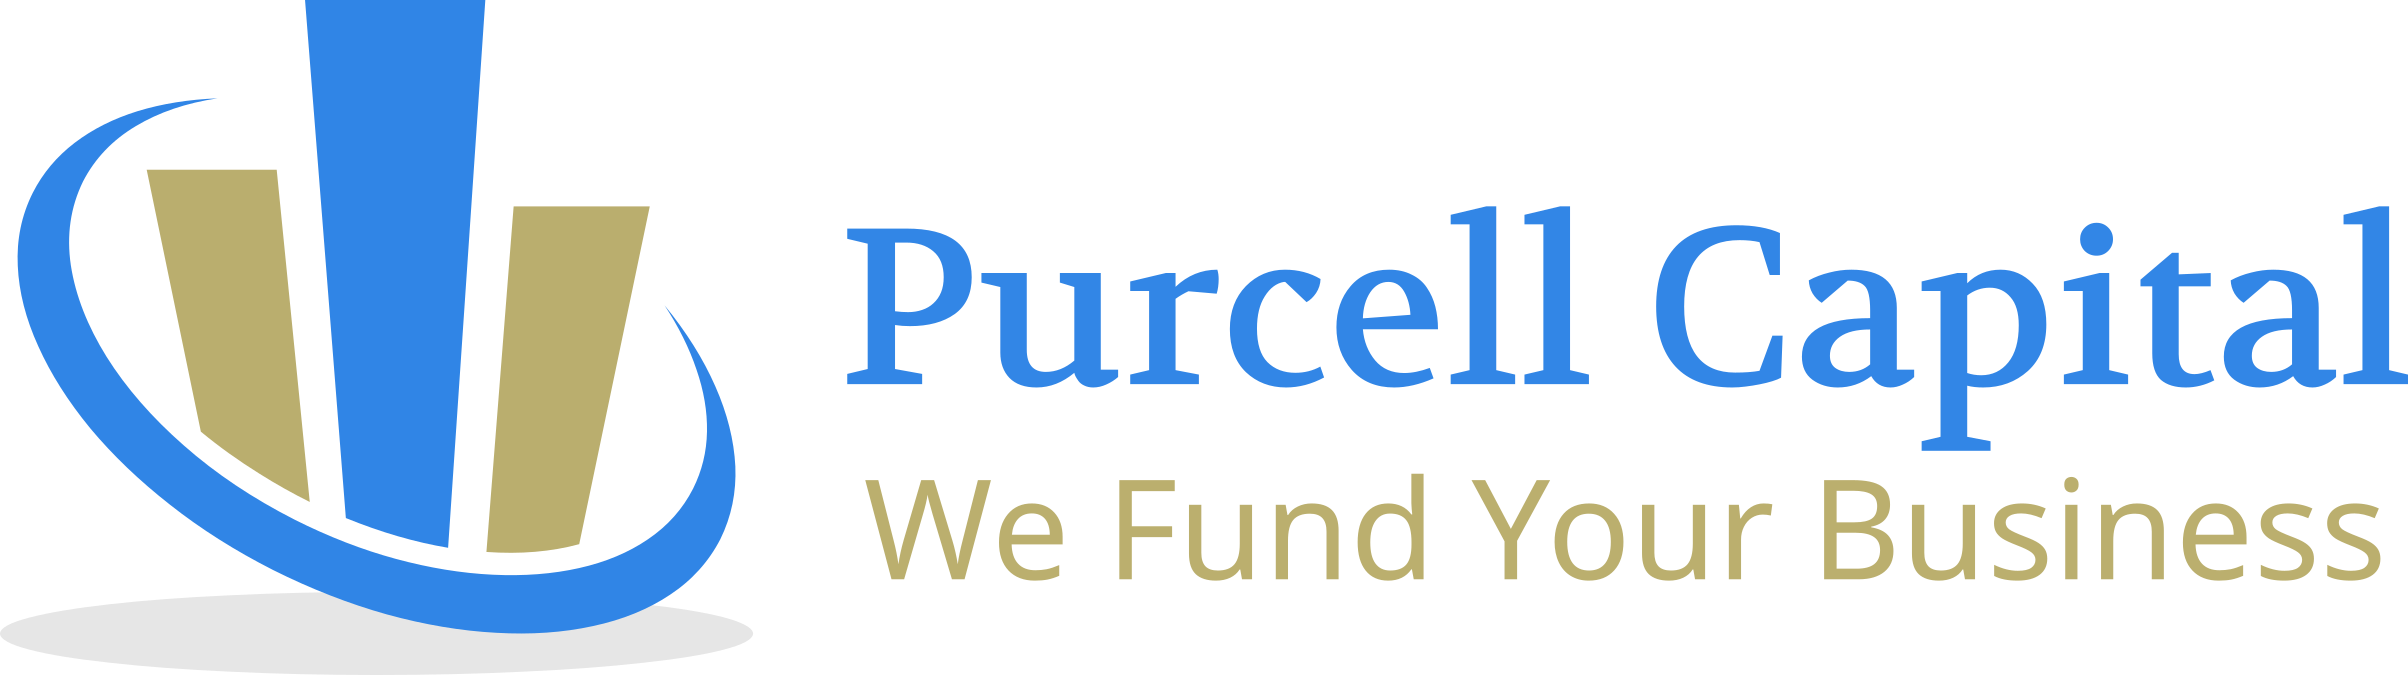 Purcell Capital